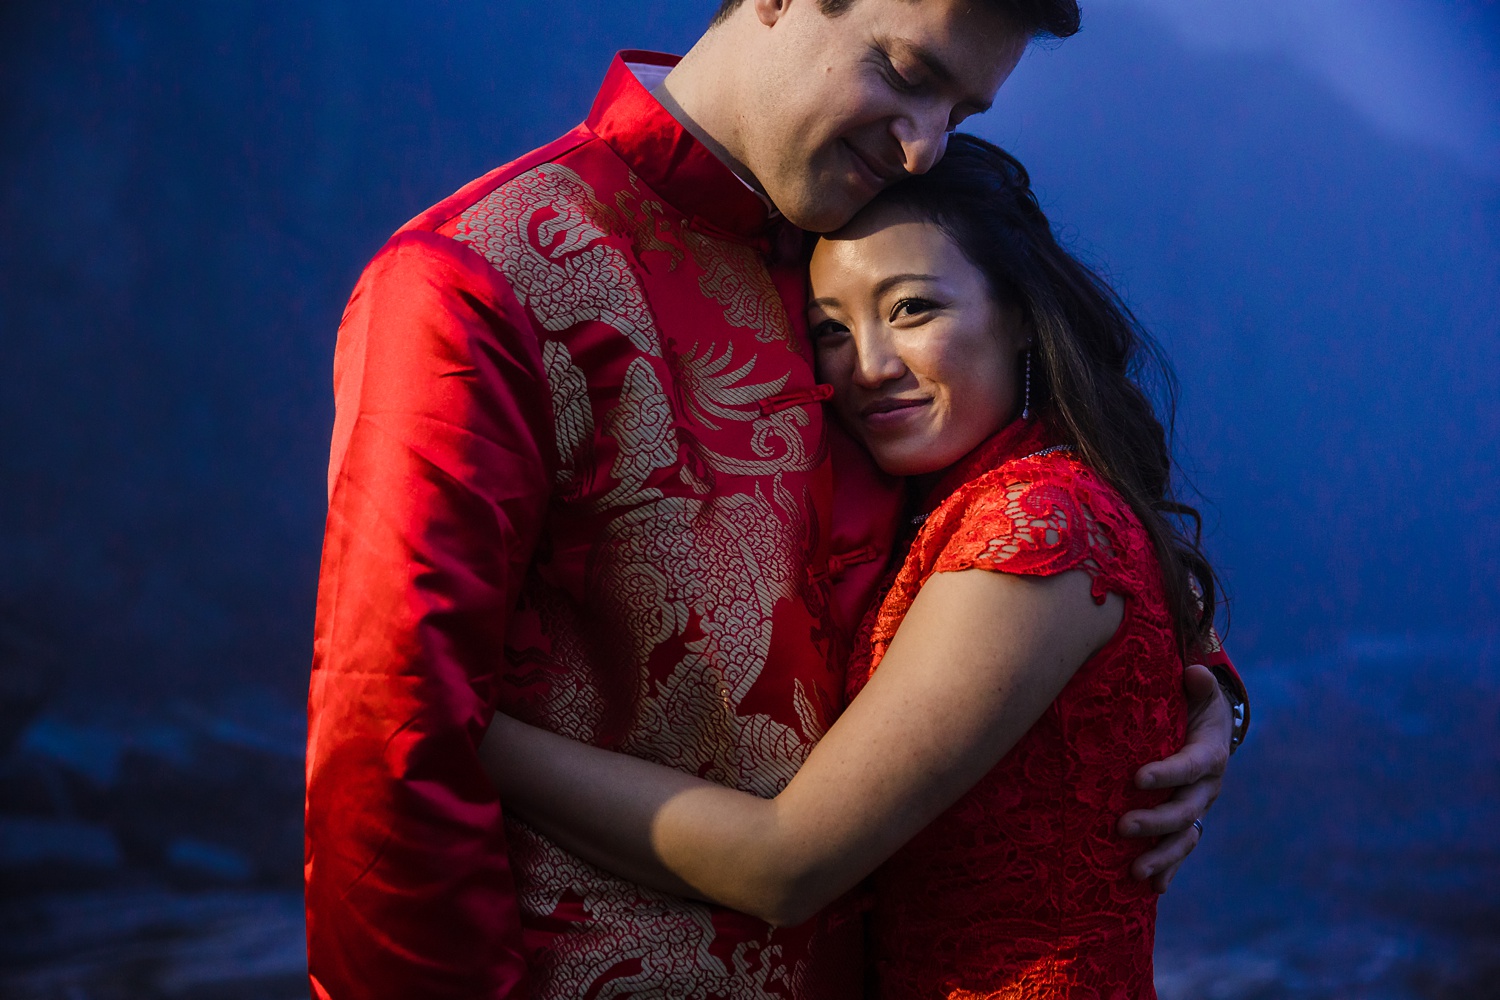 An embrace in the traditional Chinese wedding attire at Cliff House in Maine